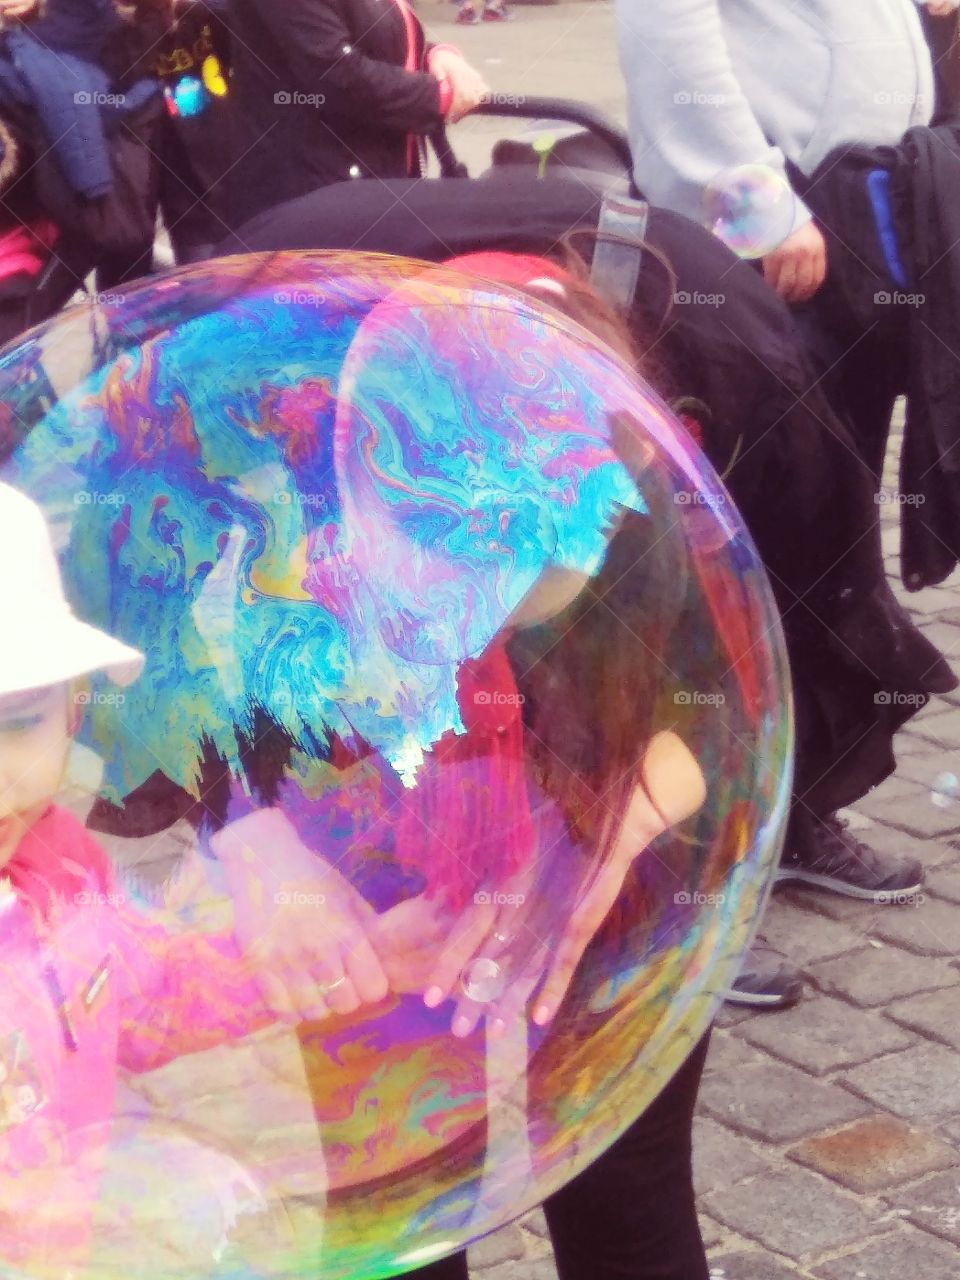 It's just one colorful bubble, but looks like some abstract picture!